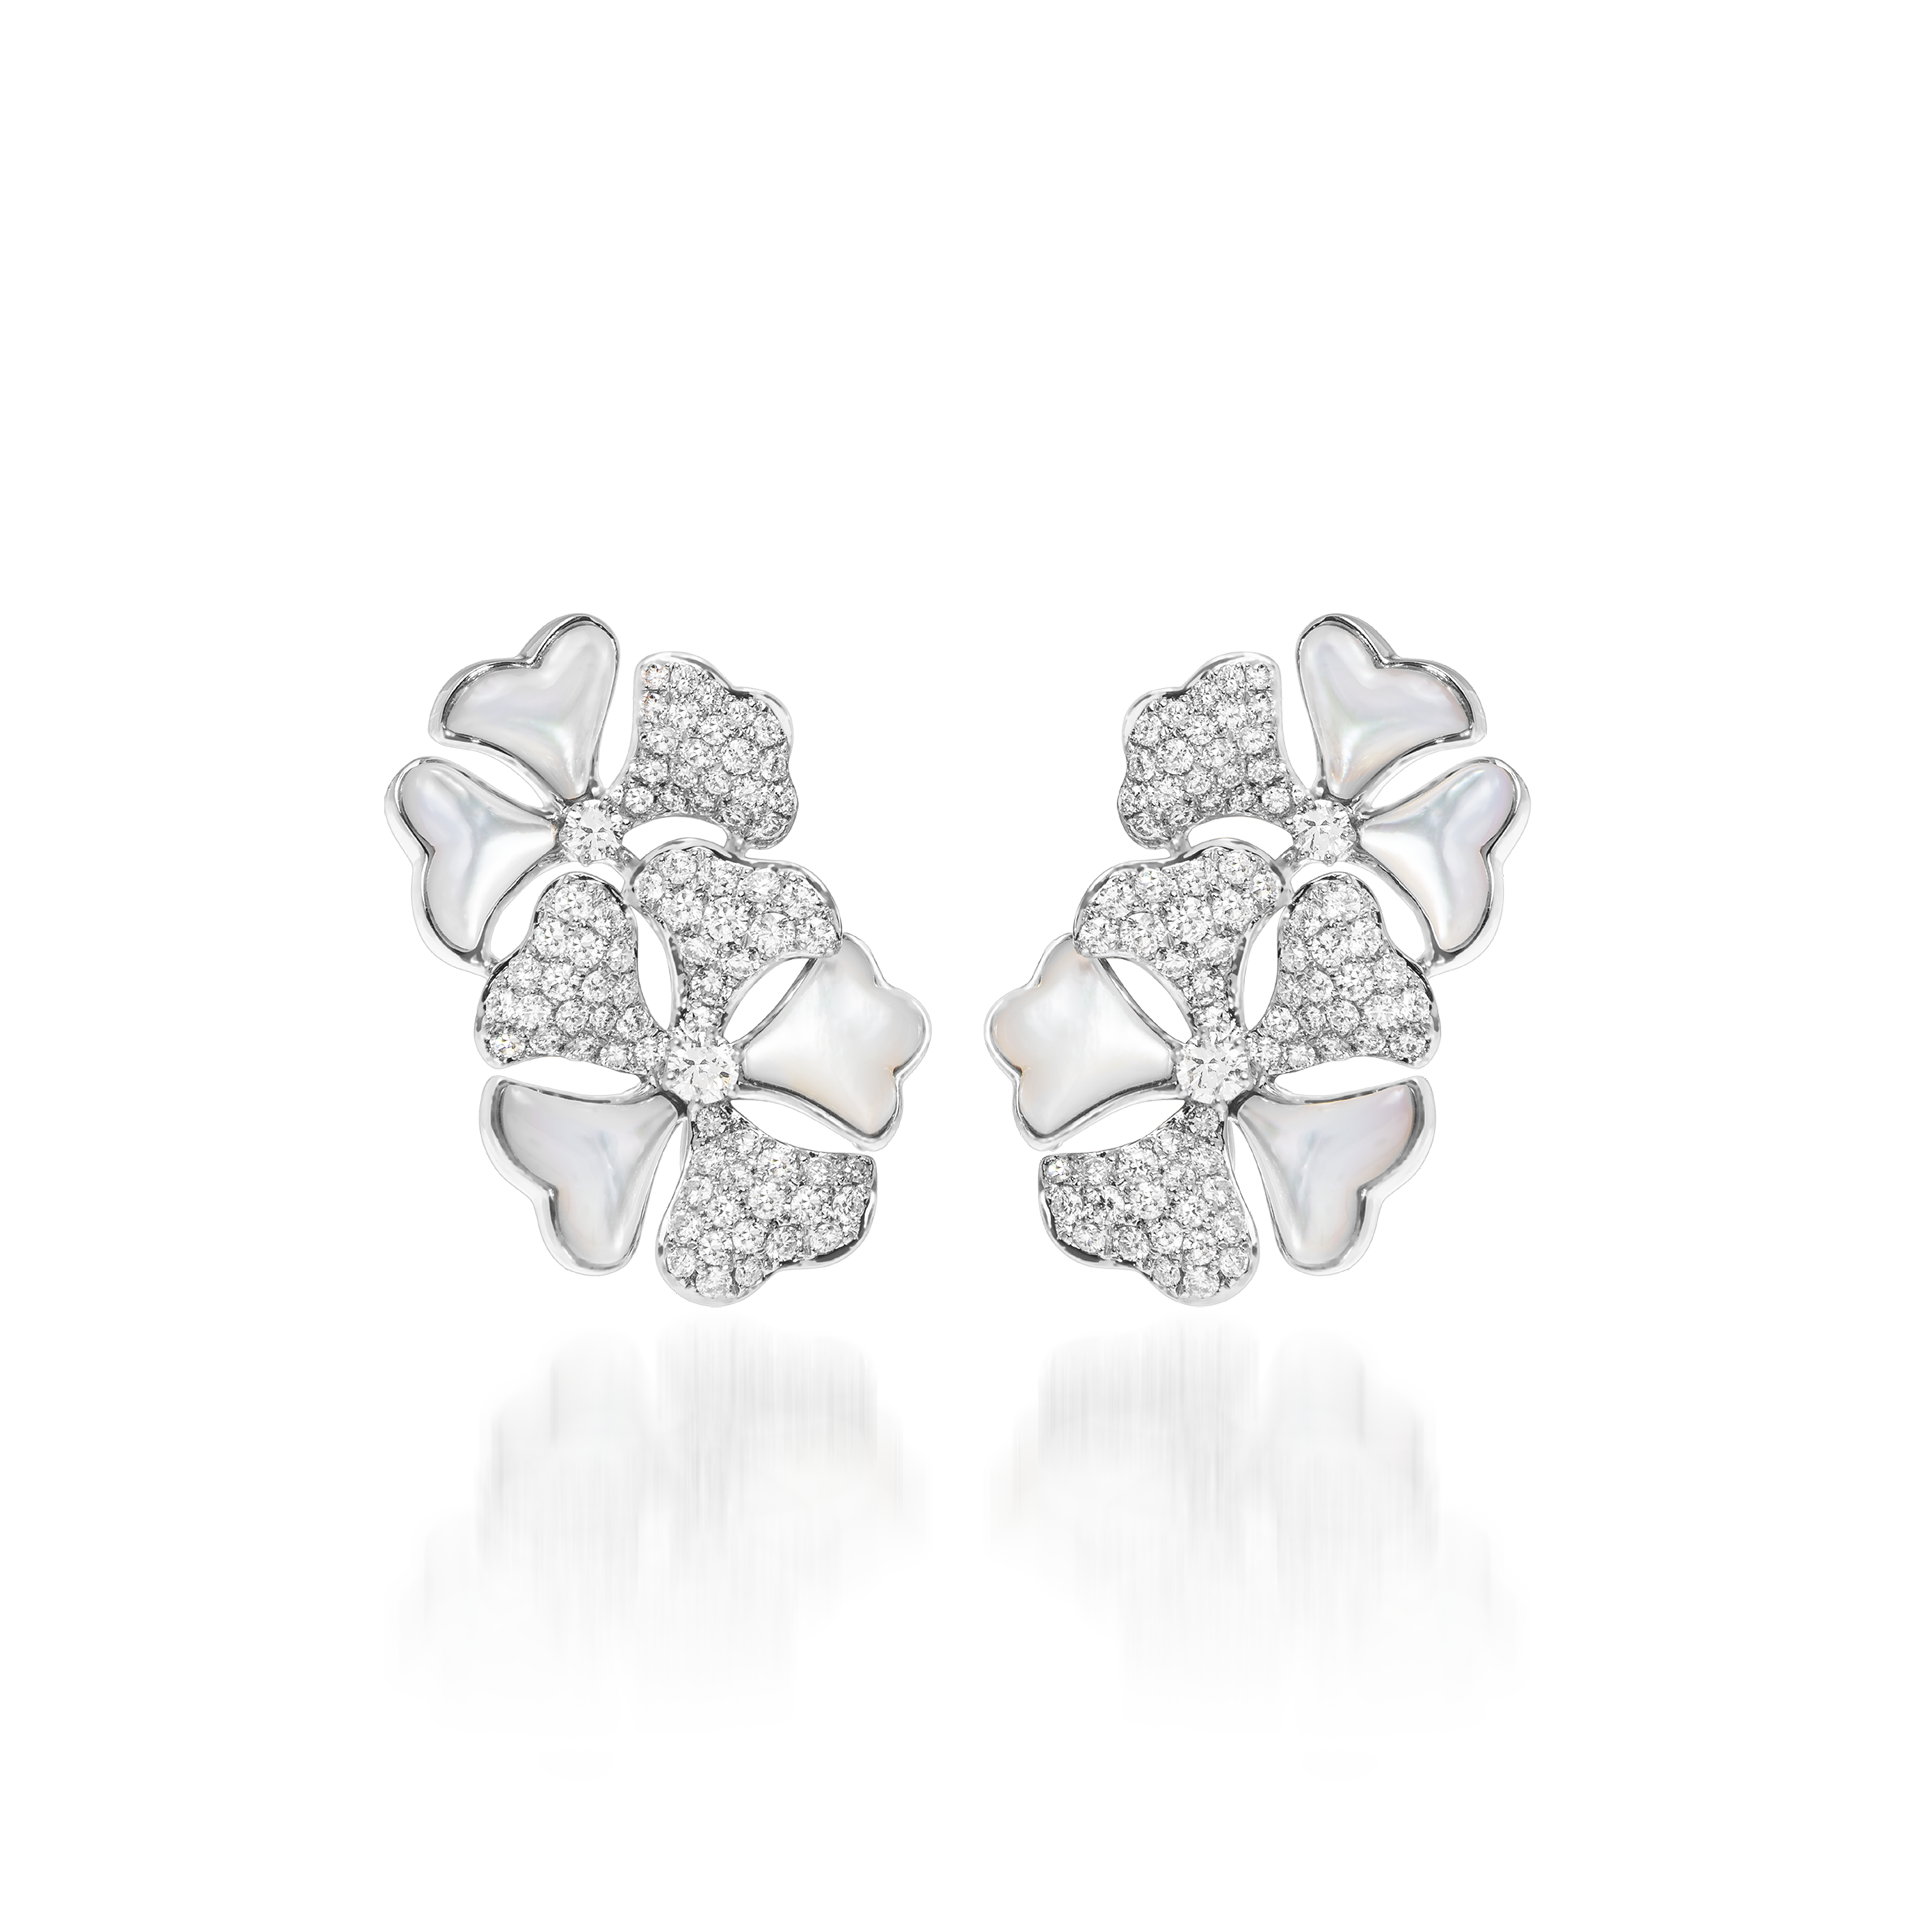 Bloom Diamond and White Mother-of-Pearl Cluster Earrings In 18K White Gold